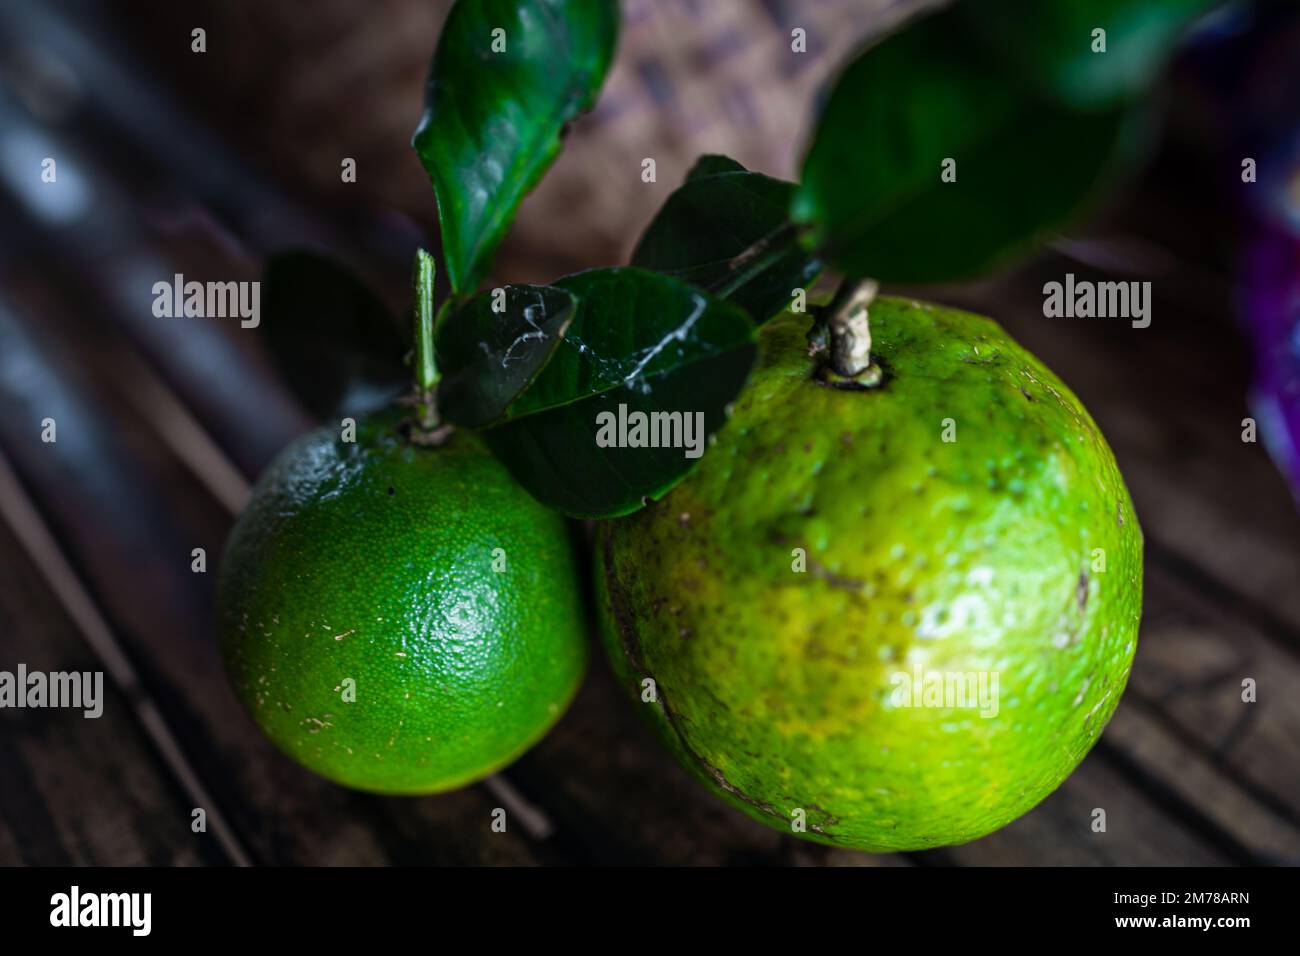 Green citrus freshly picked from the tree. Stock Photo